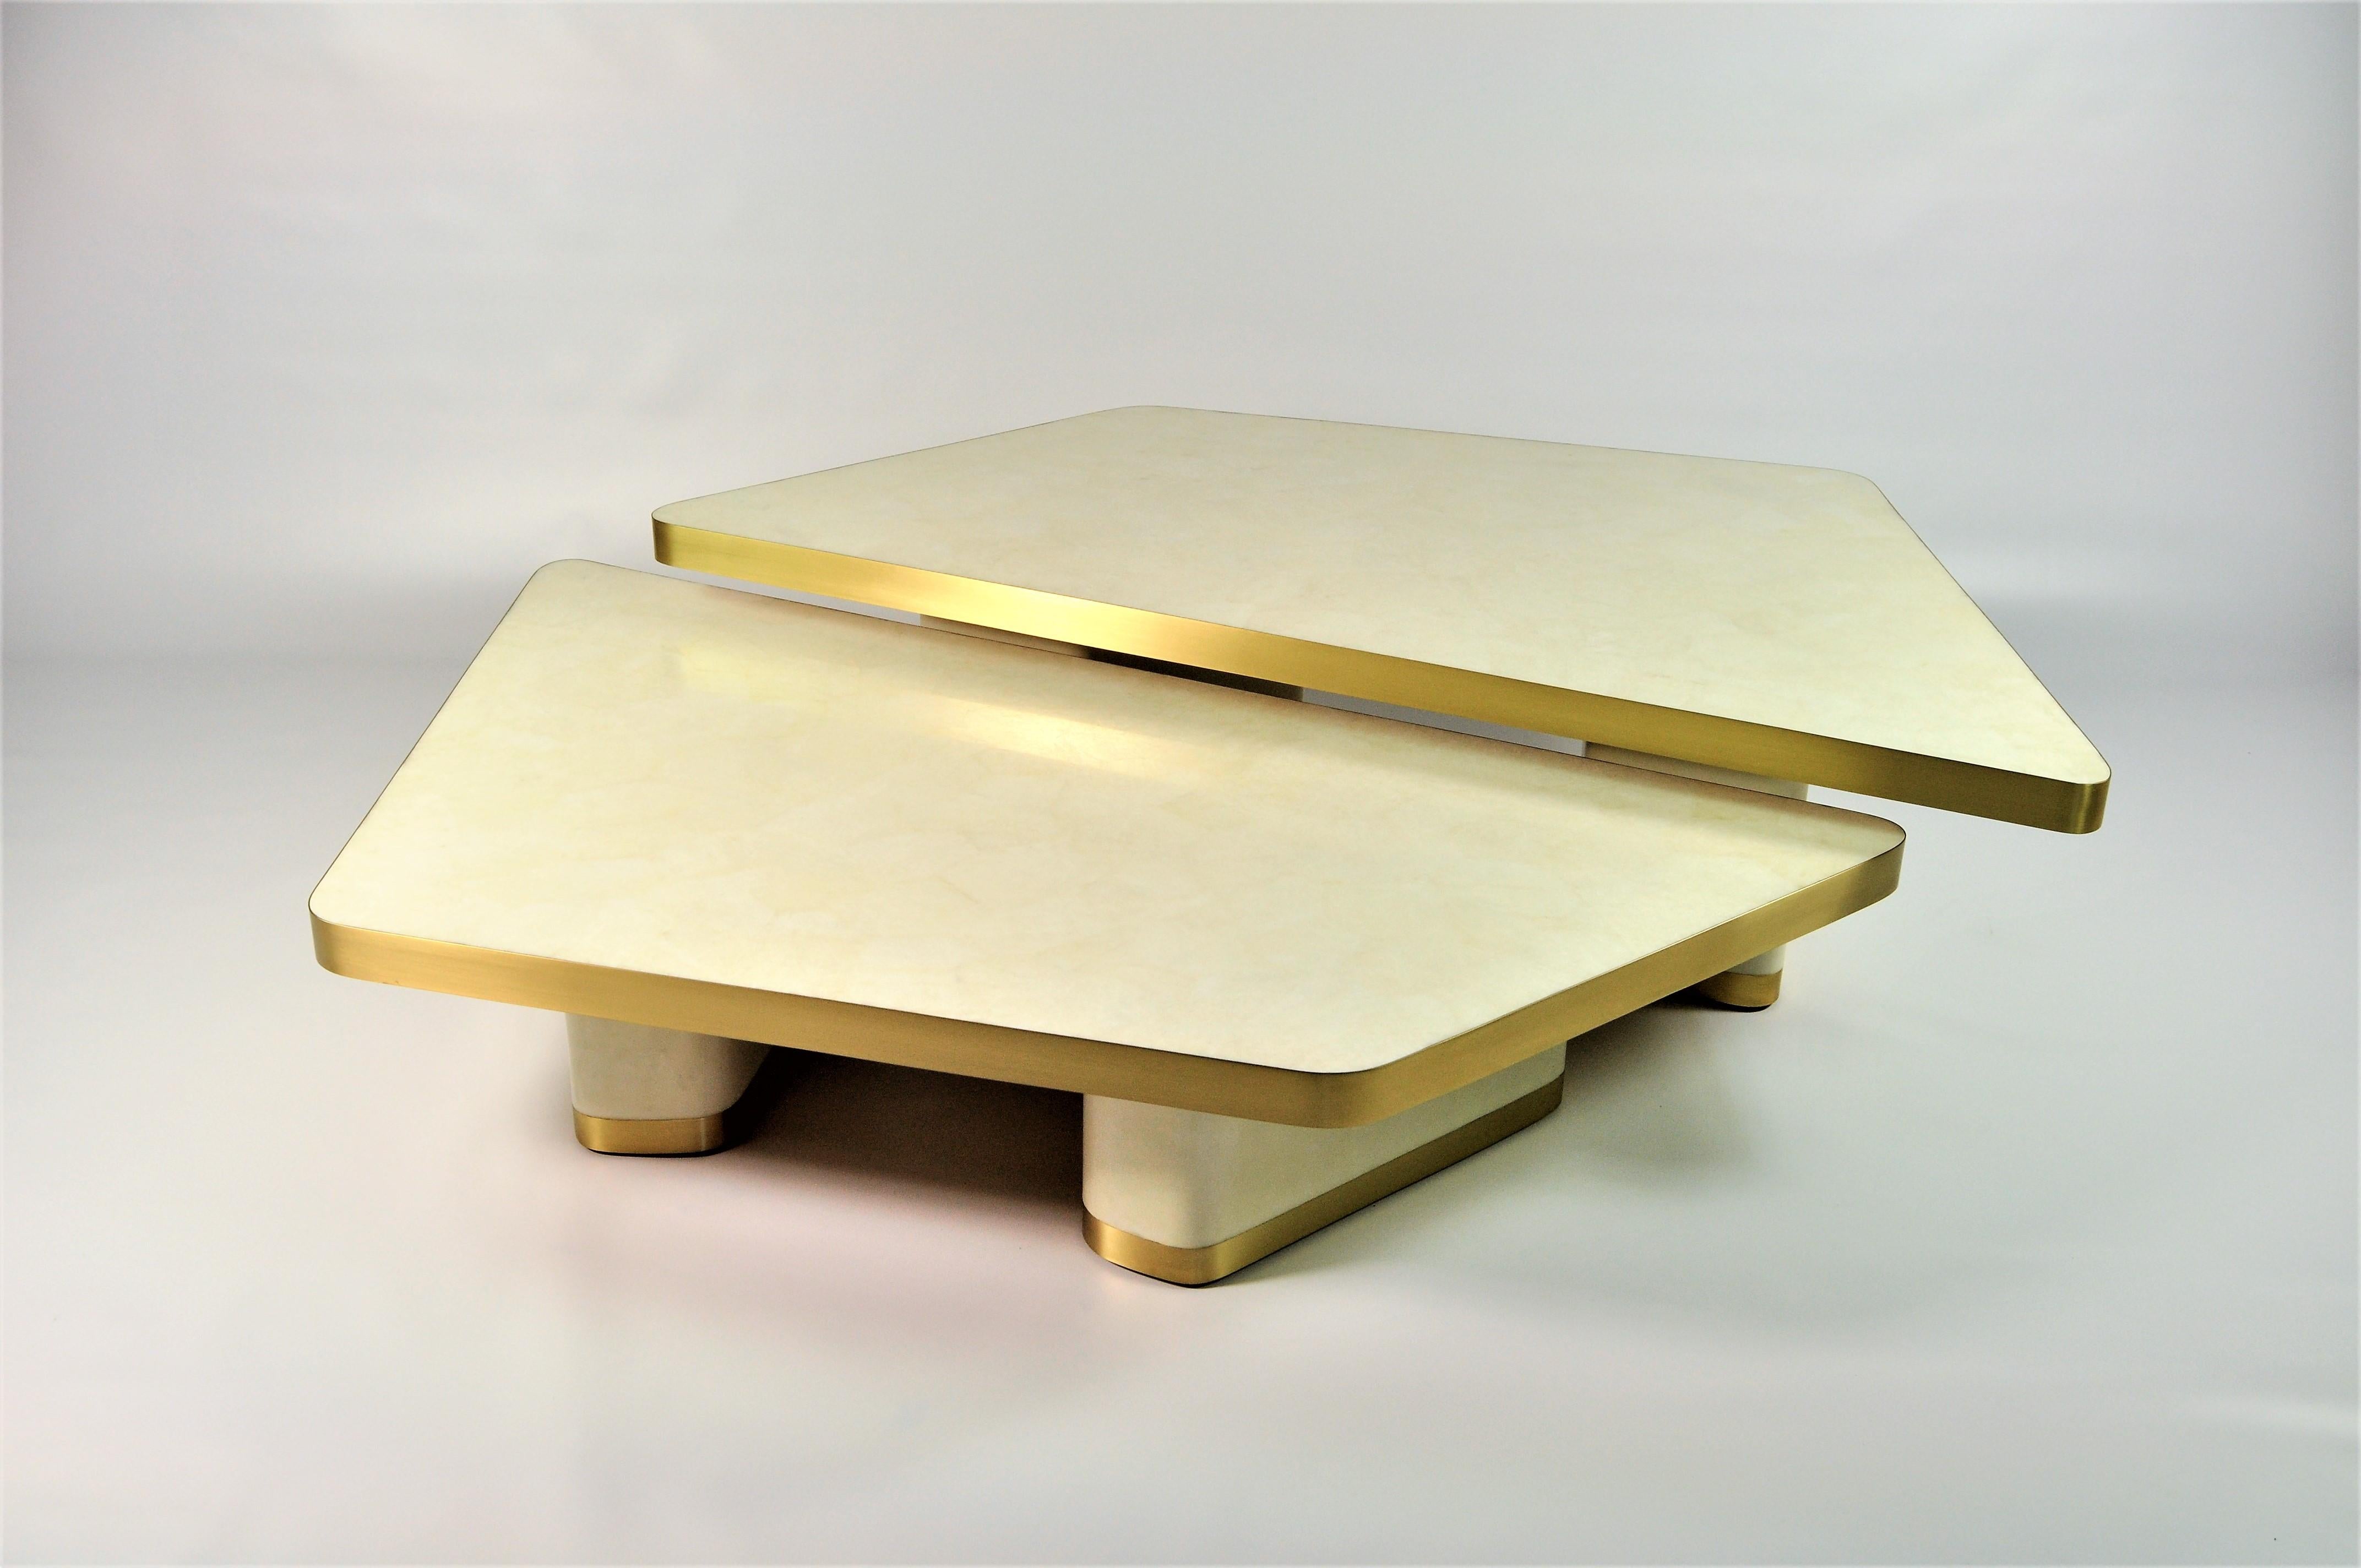 The set of 2 coffee tables VELA is made of various inlaid materials.
These modular tables can be settled up following your wishes.
The top is made of polished rock crystal marquetry with a brushed brass edge. 
The feet are covered with a cream